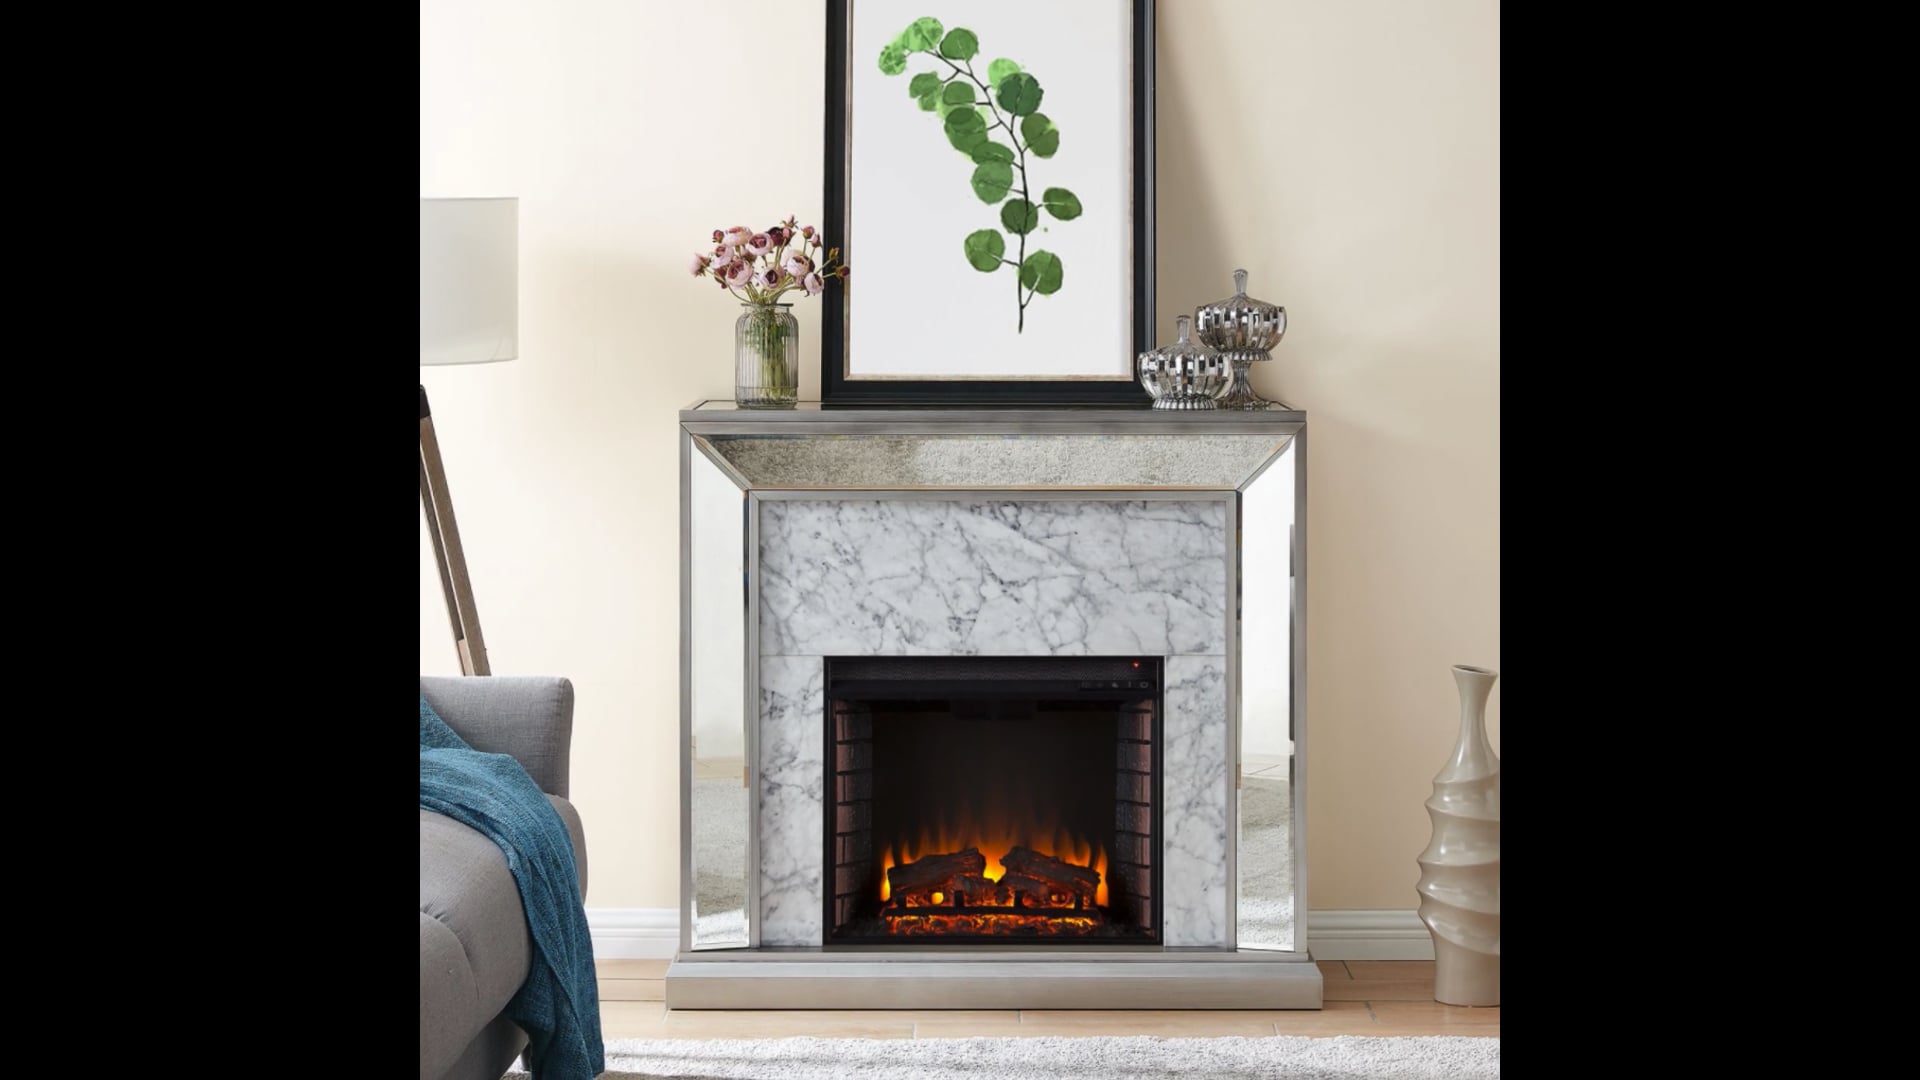 Trason Mirrored Faux Marble Fireplace, Mirror, Silver